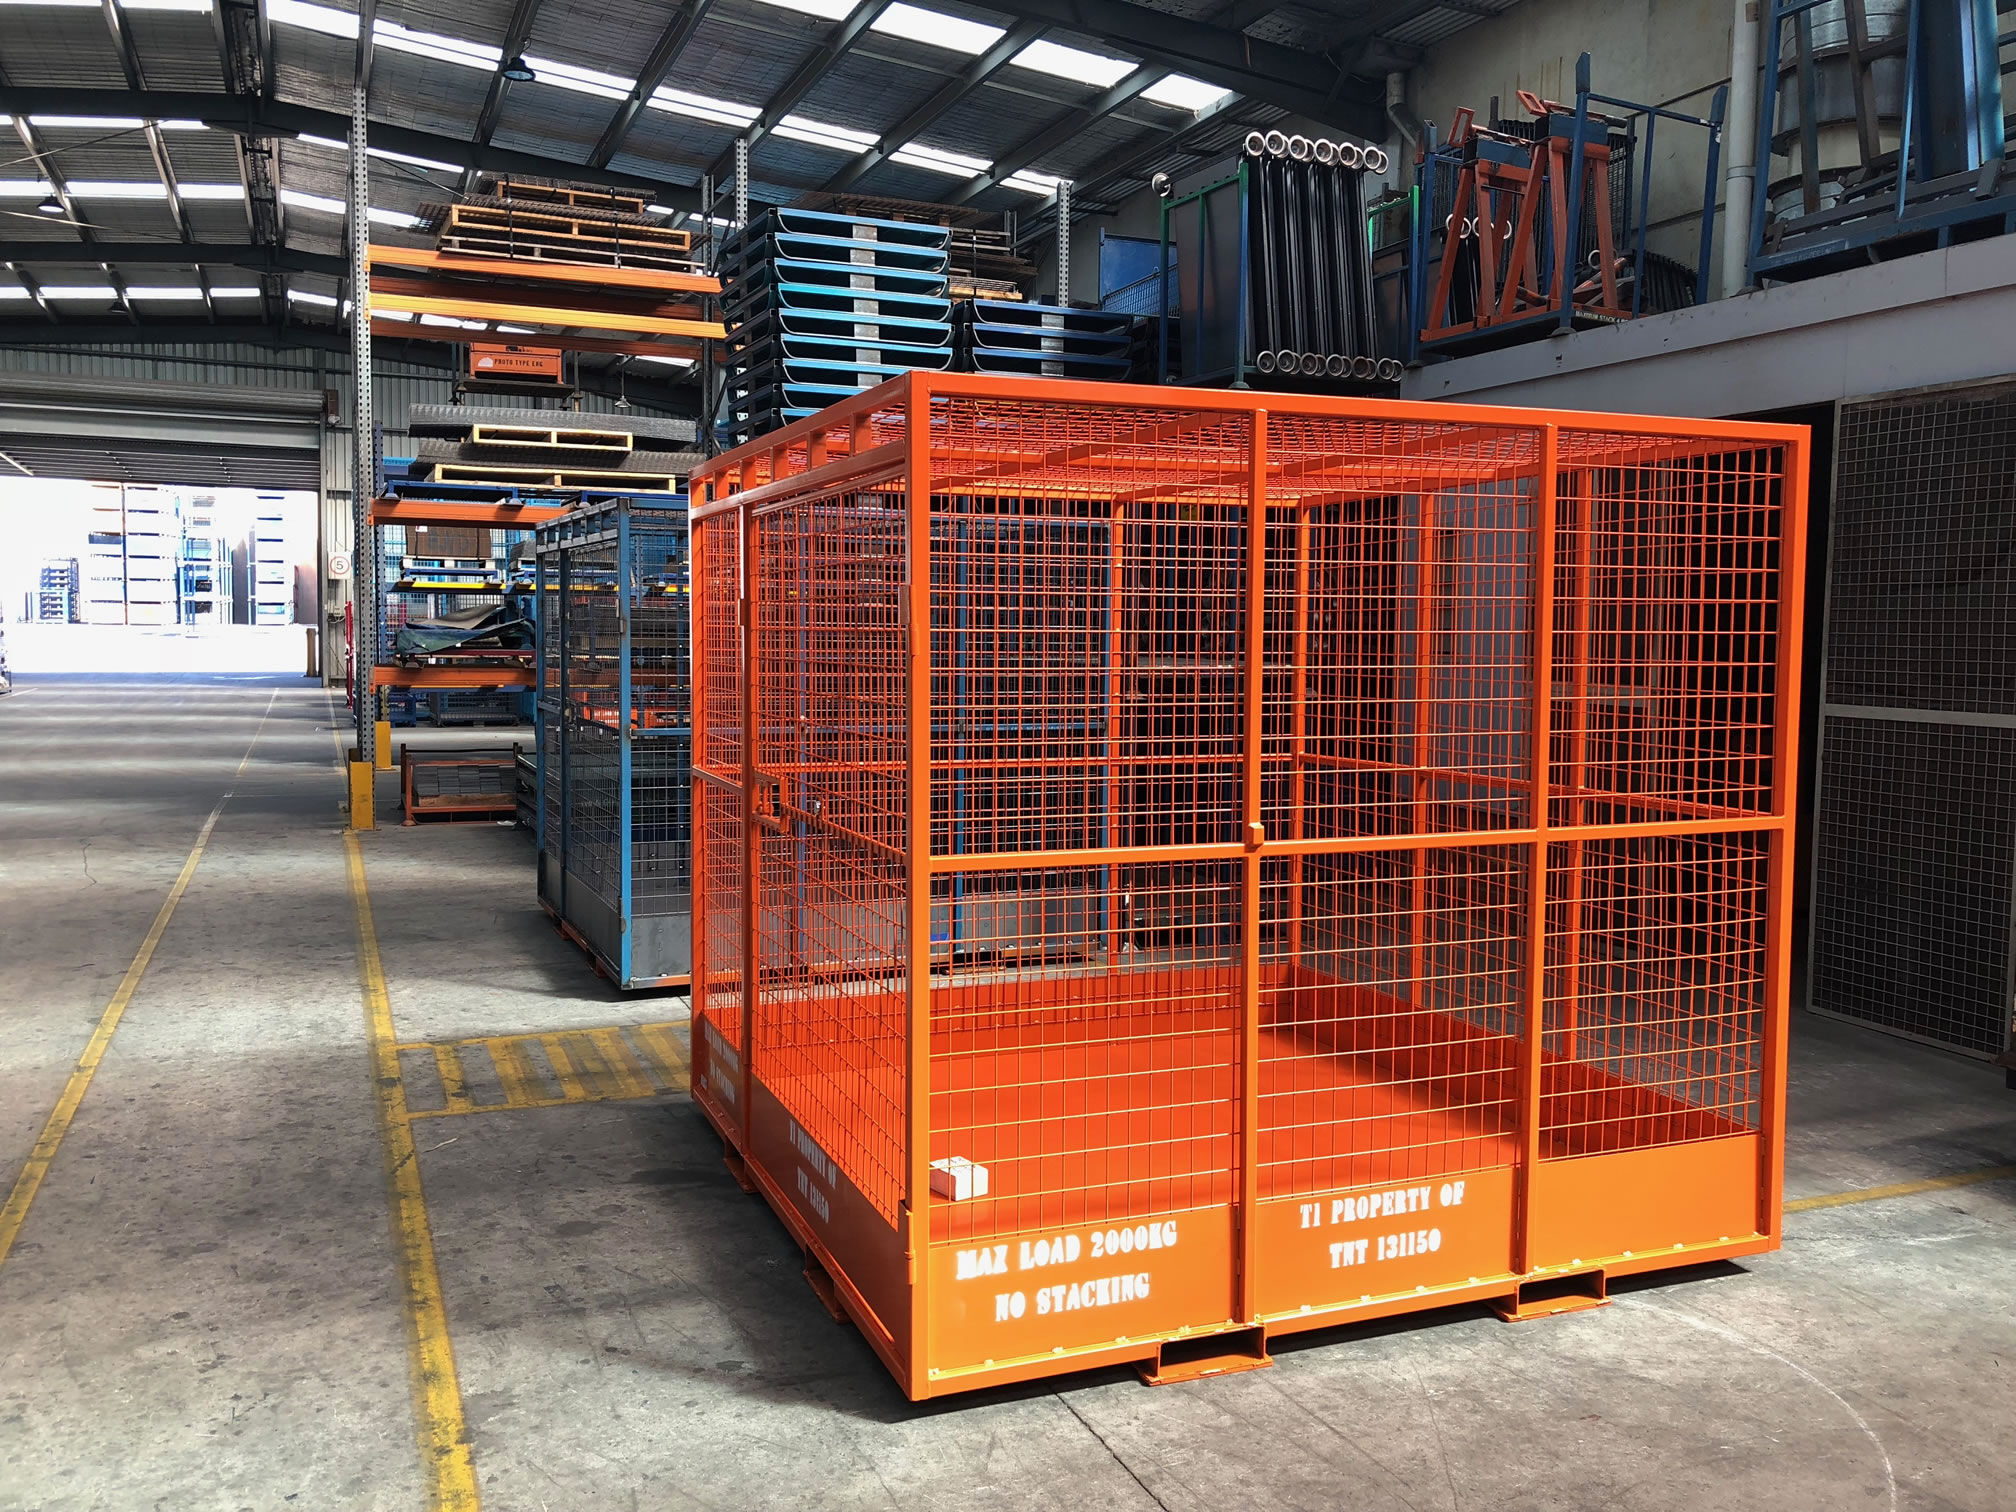 Cevol Custom made commercial grade Steel Wire Security Cages and Stillages